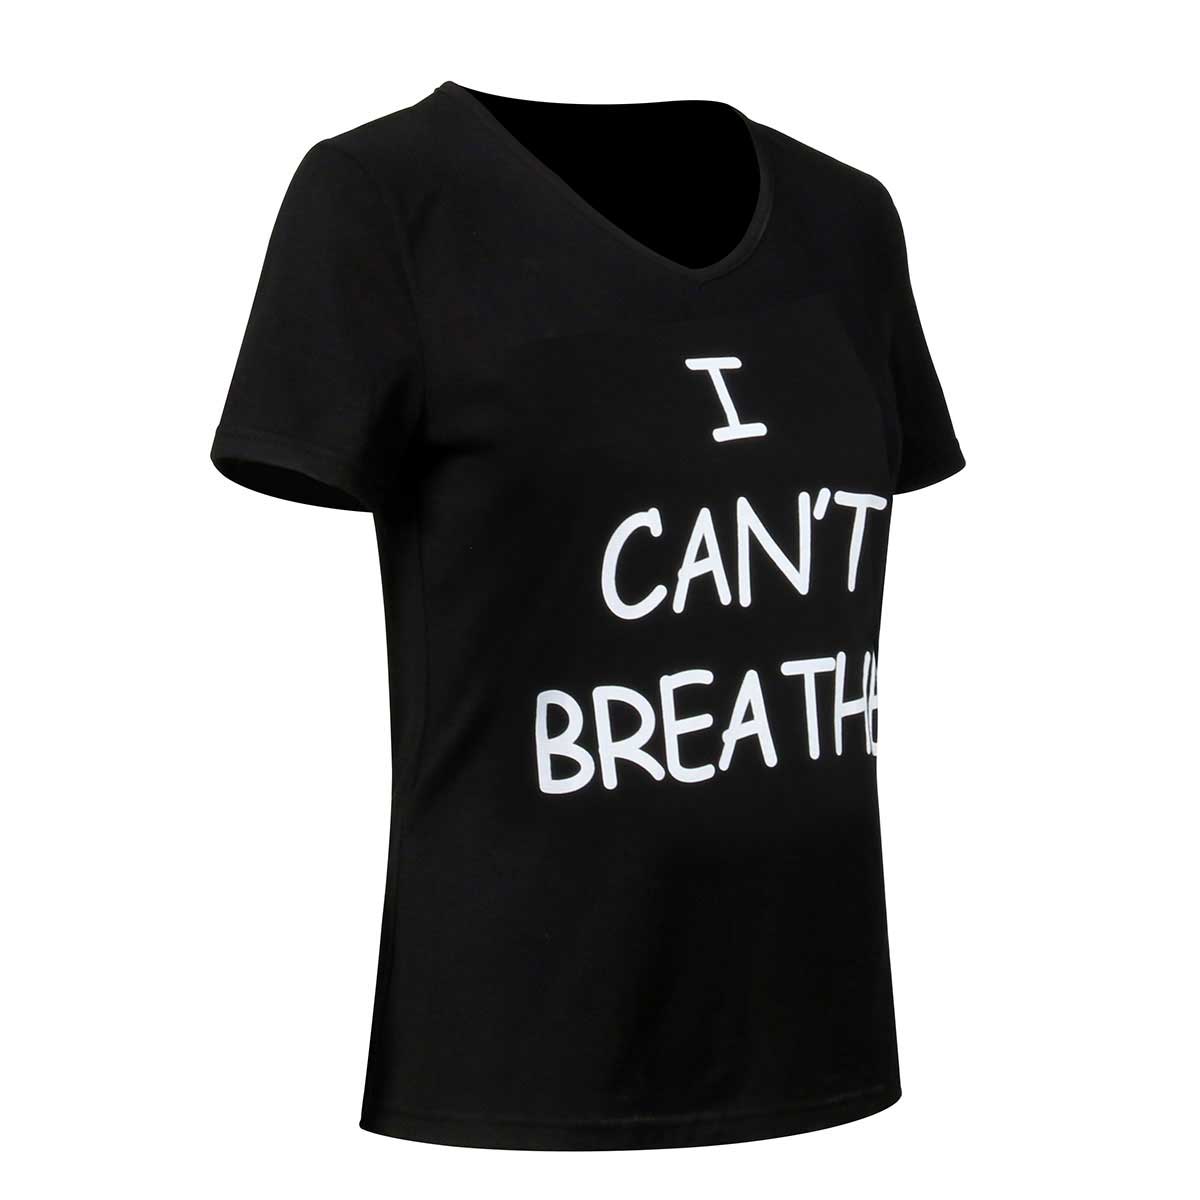 I Can't Breathe T-Shirt Women's Black Protest Tee 